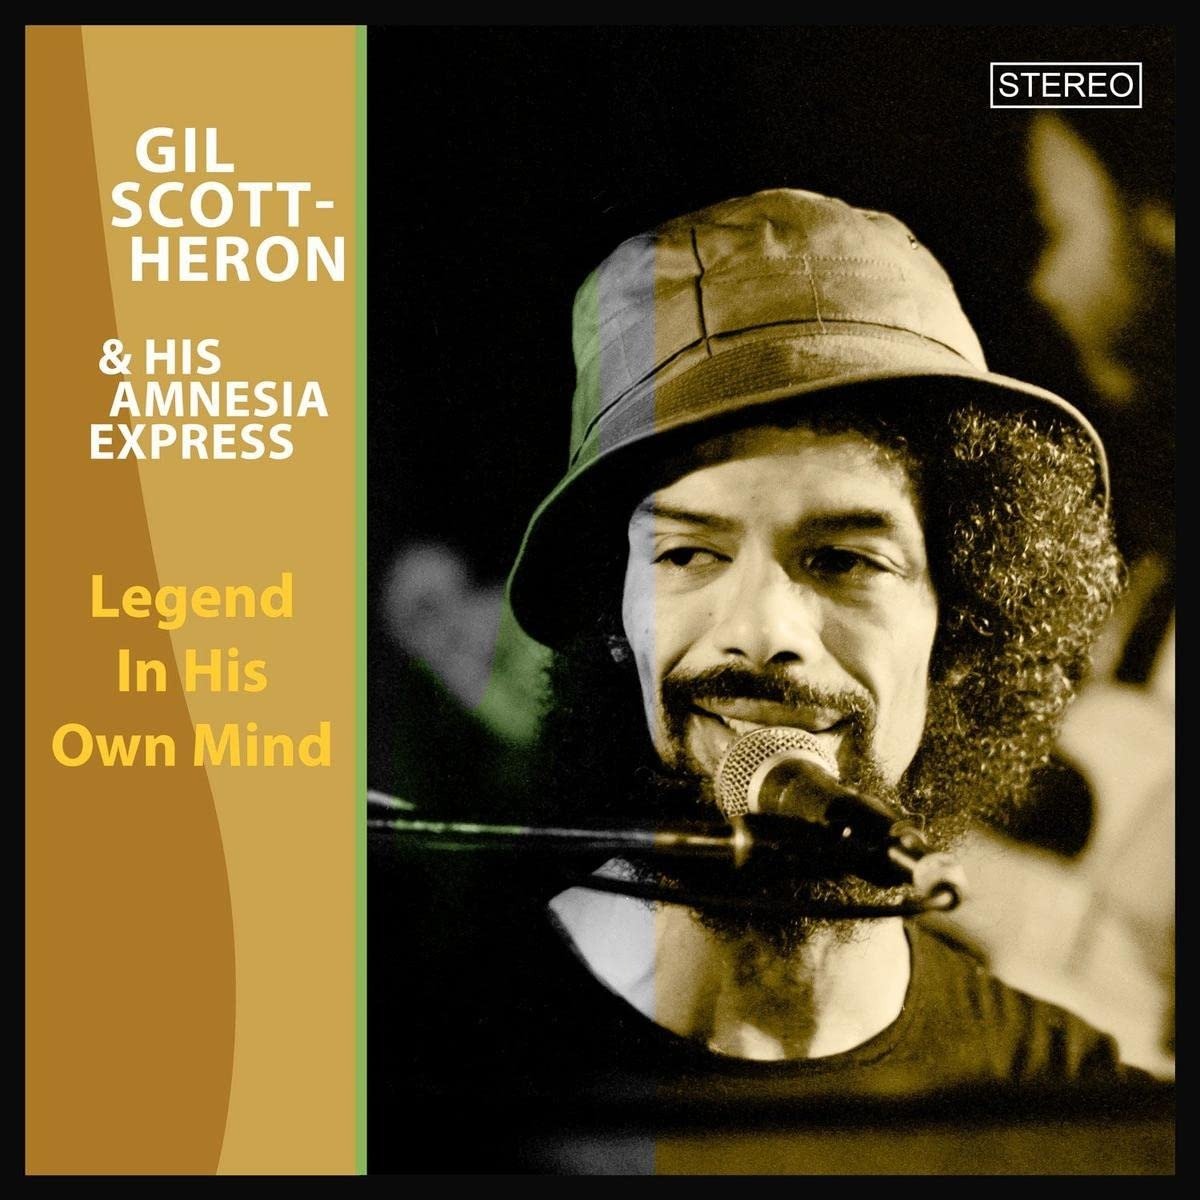 CD Shop - SCOTT-HERON, GIL & HIS AM LEGEND IN HIS OWN MIND